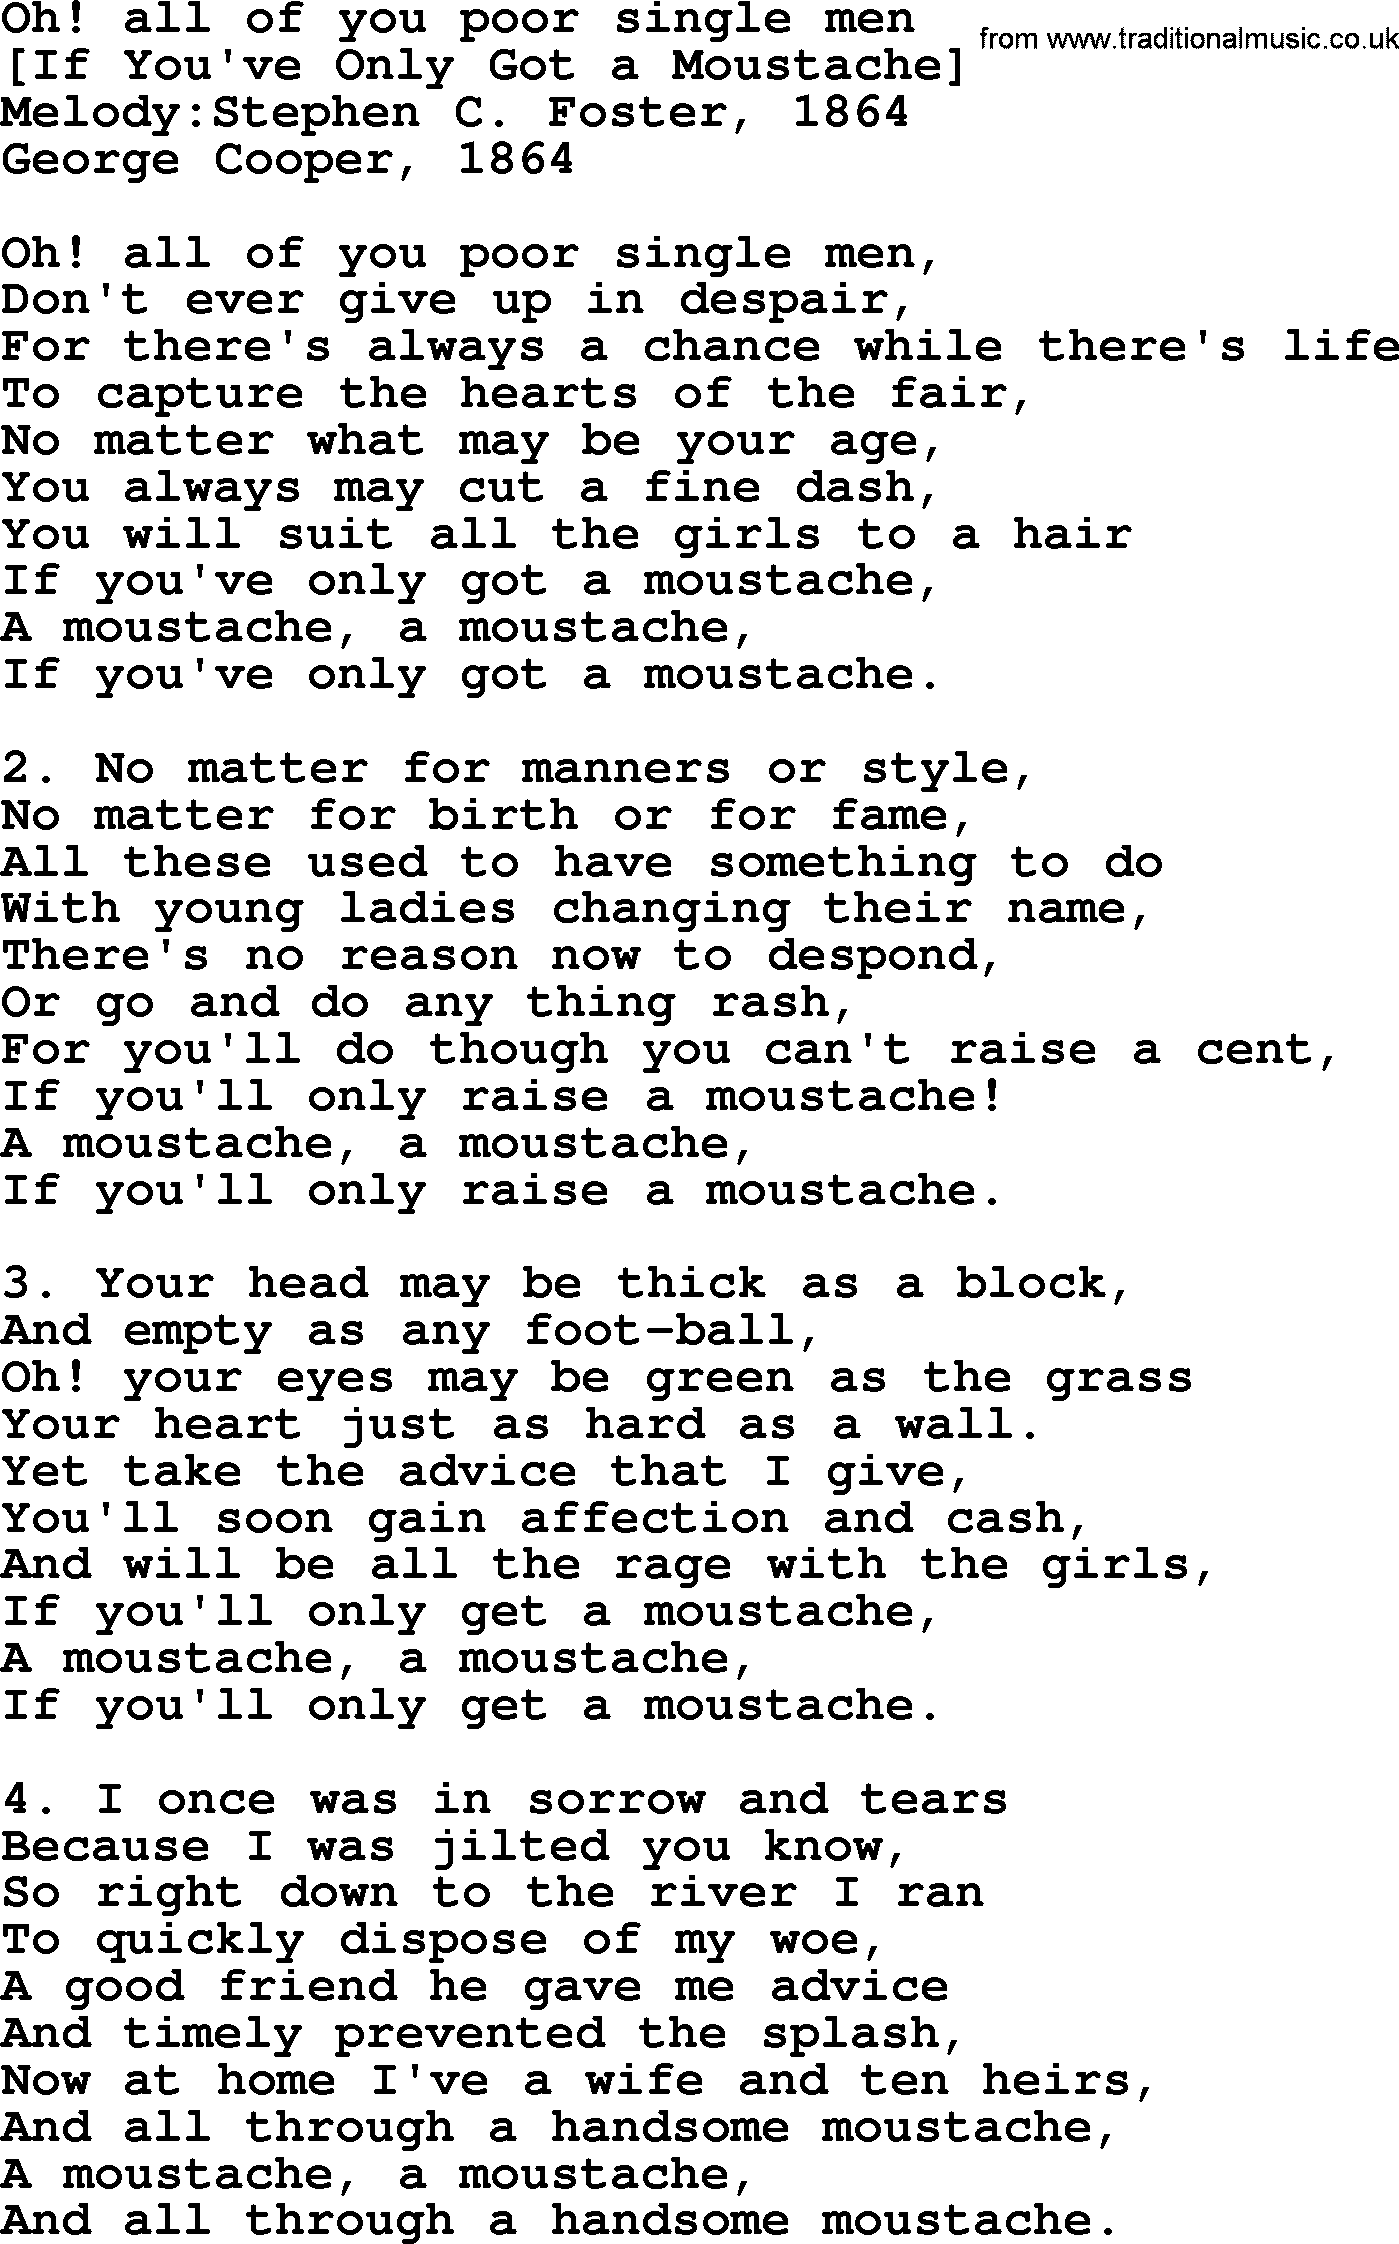 Old American Song: Oh! All Of You Poor Single Men, lyrics